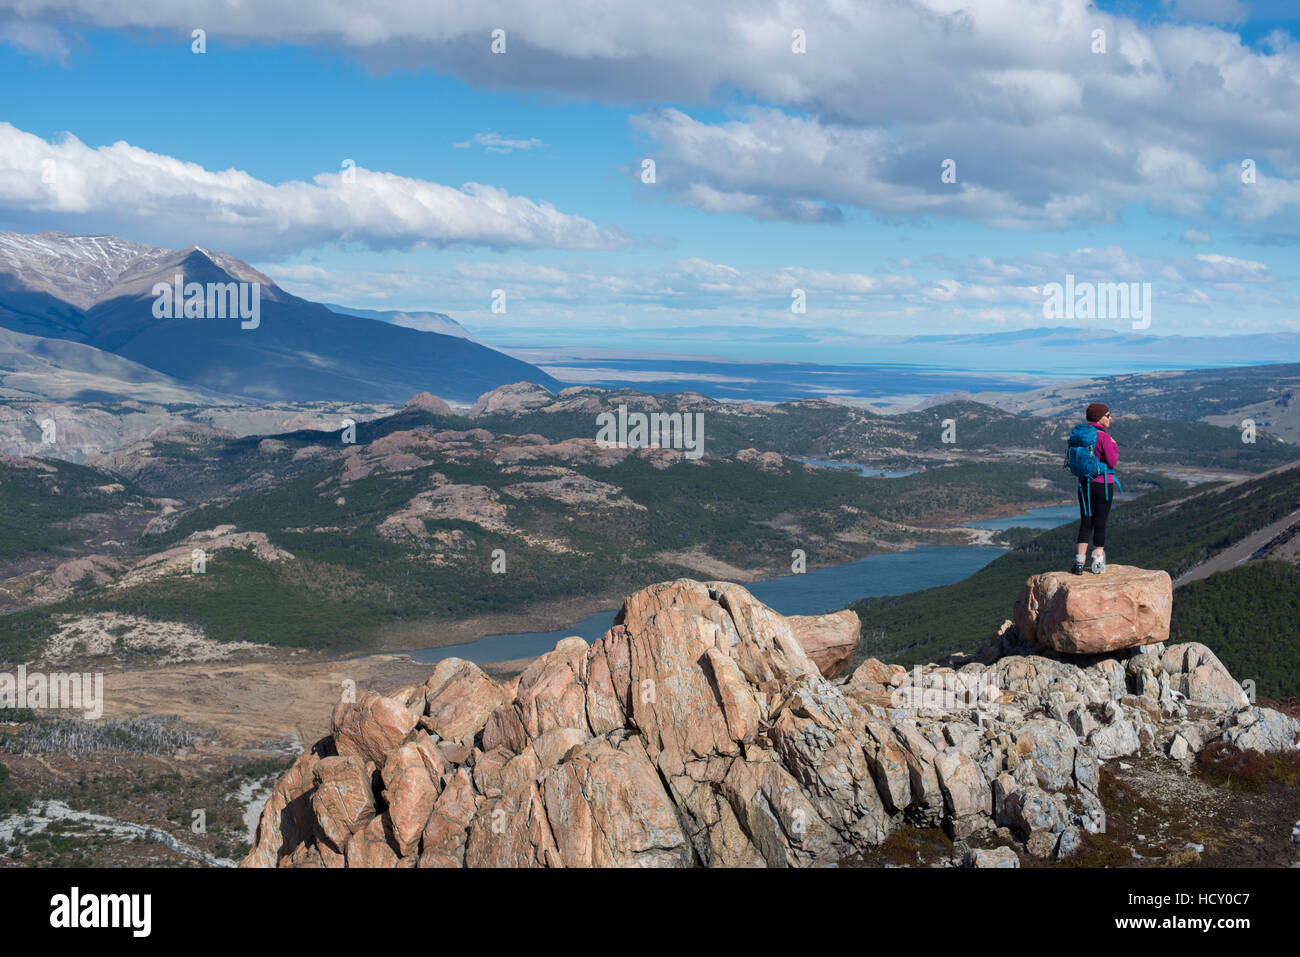 A woman takes a break from hiking the trail in El Chalten National Park to take in the view, Lake Vied, Patagonia, Argentina Stock Photo